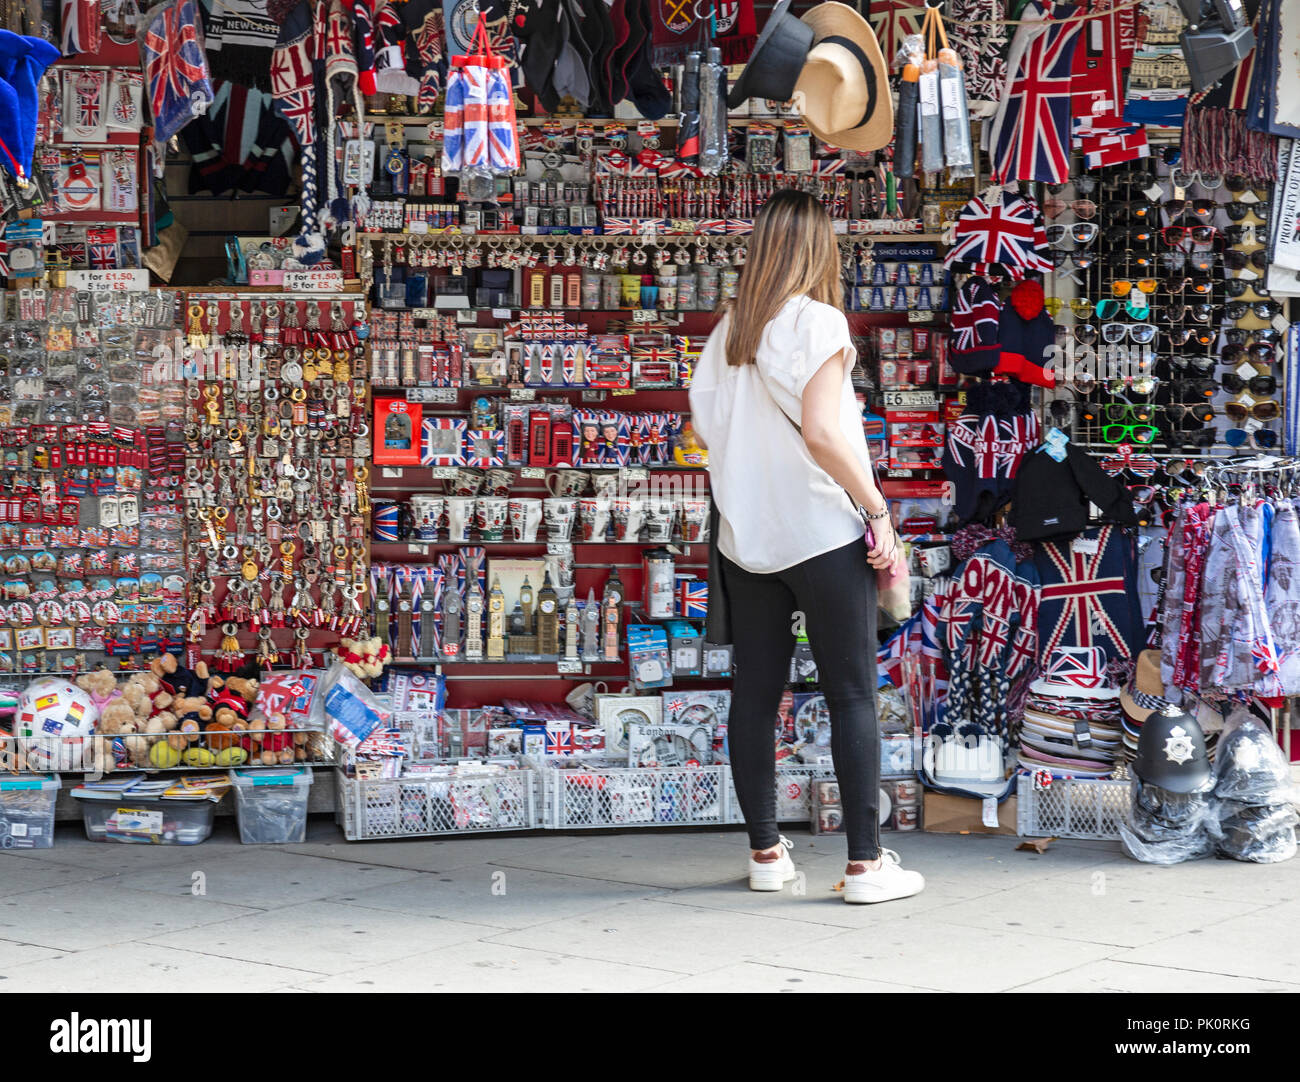 A young female tourist browses a stall in London, England, selling merchandise relating to London, England, and the UK. Stock Photo